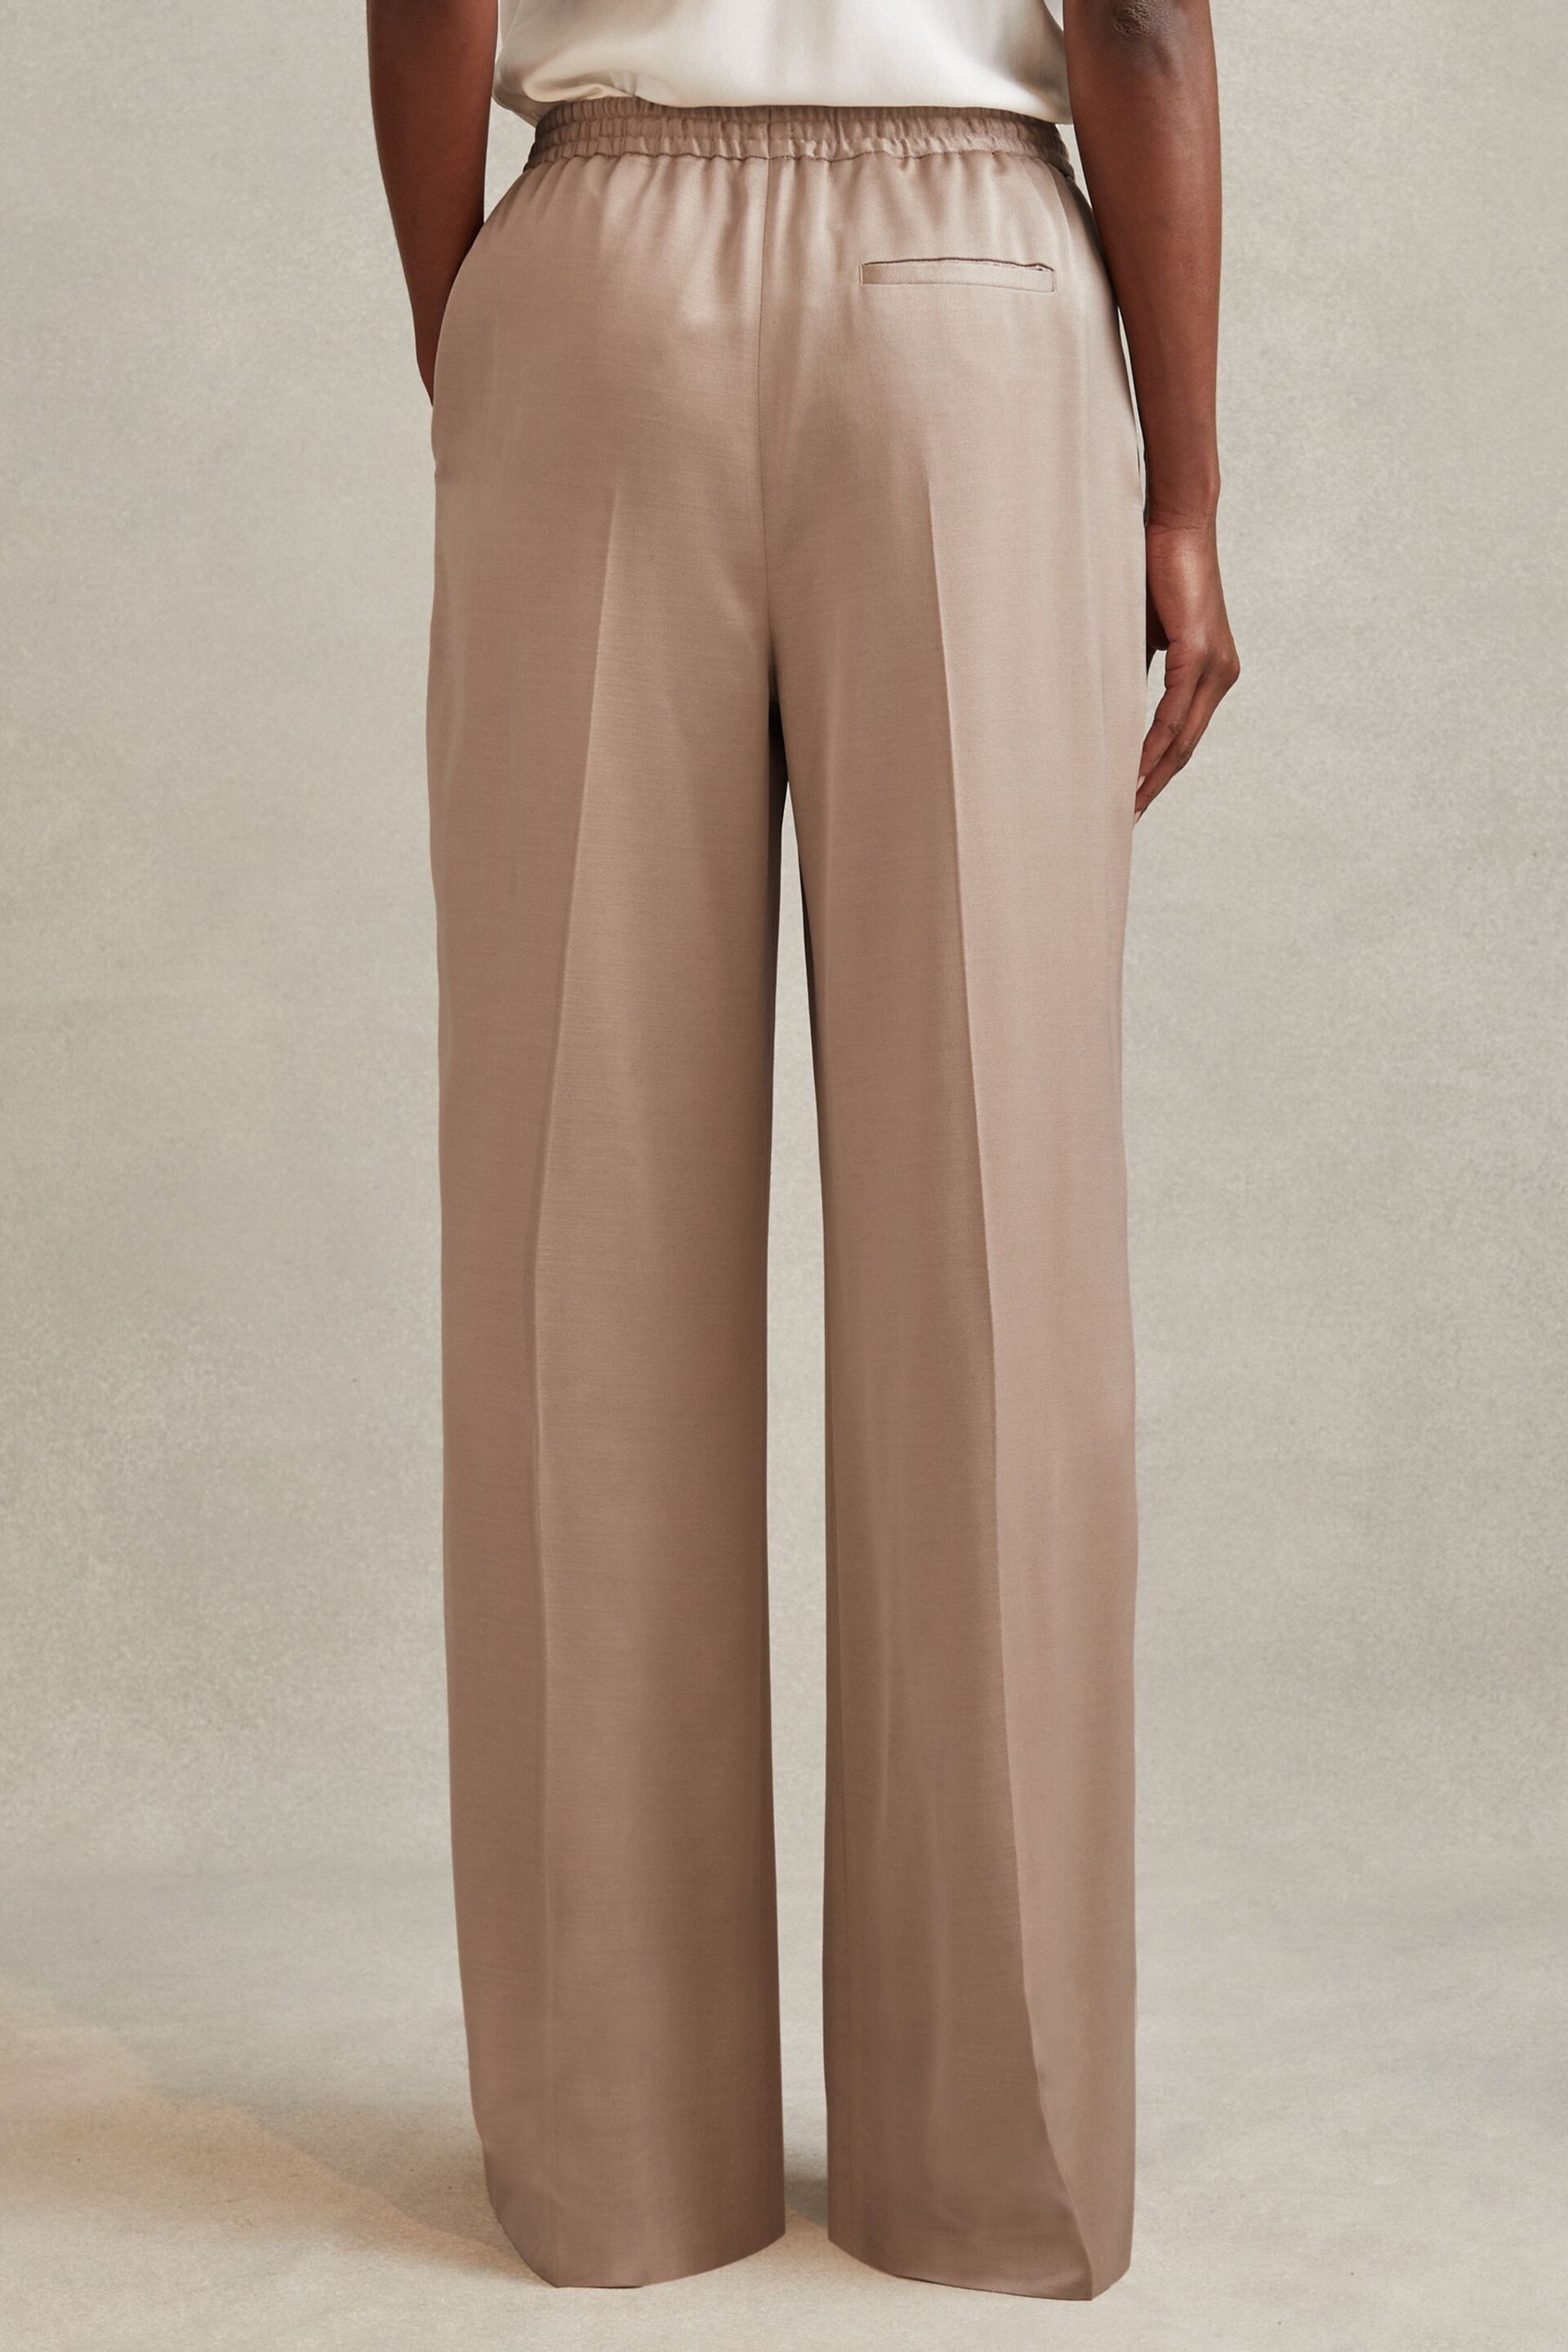 Reiss Gold Cole Satin Drawstring Wide Leg Trousers - Image 4 of 5